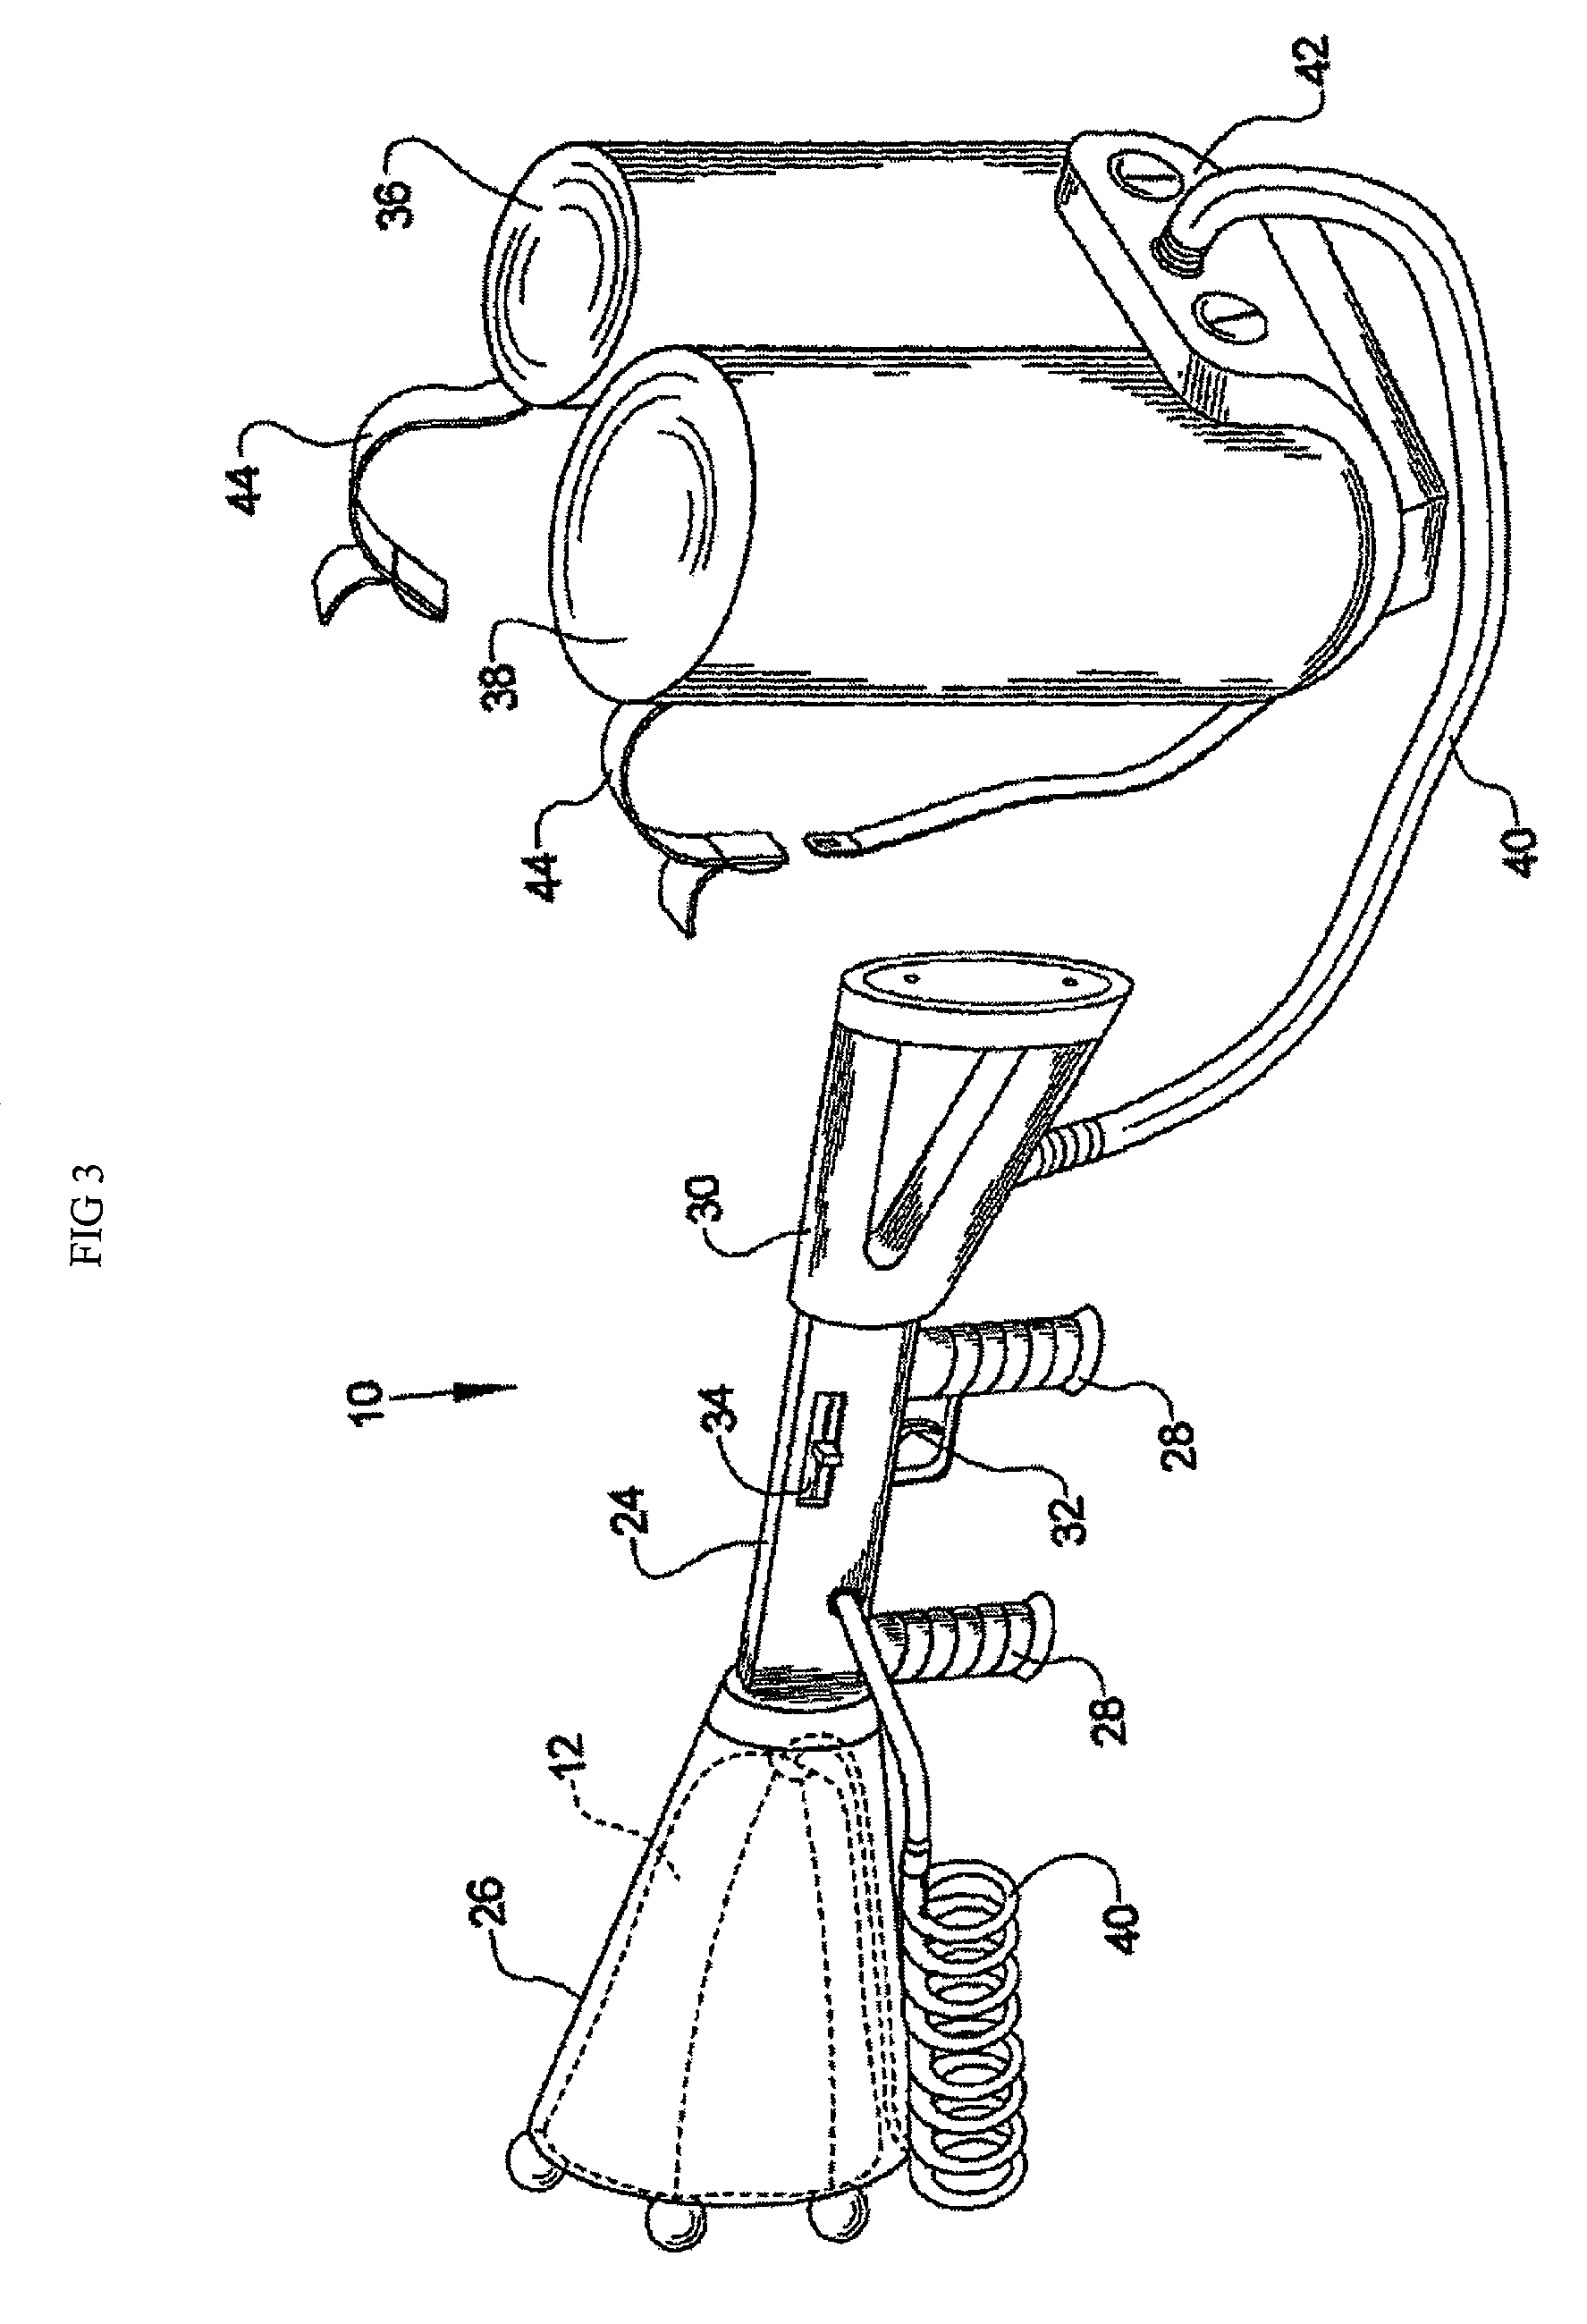 Compositions, methods and devices for control and clean-up of hazardous spills